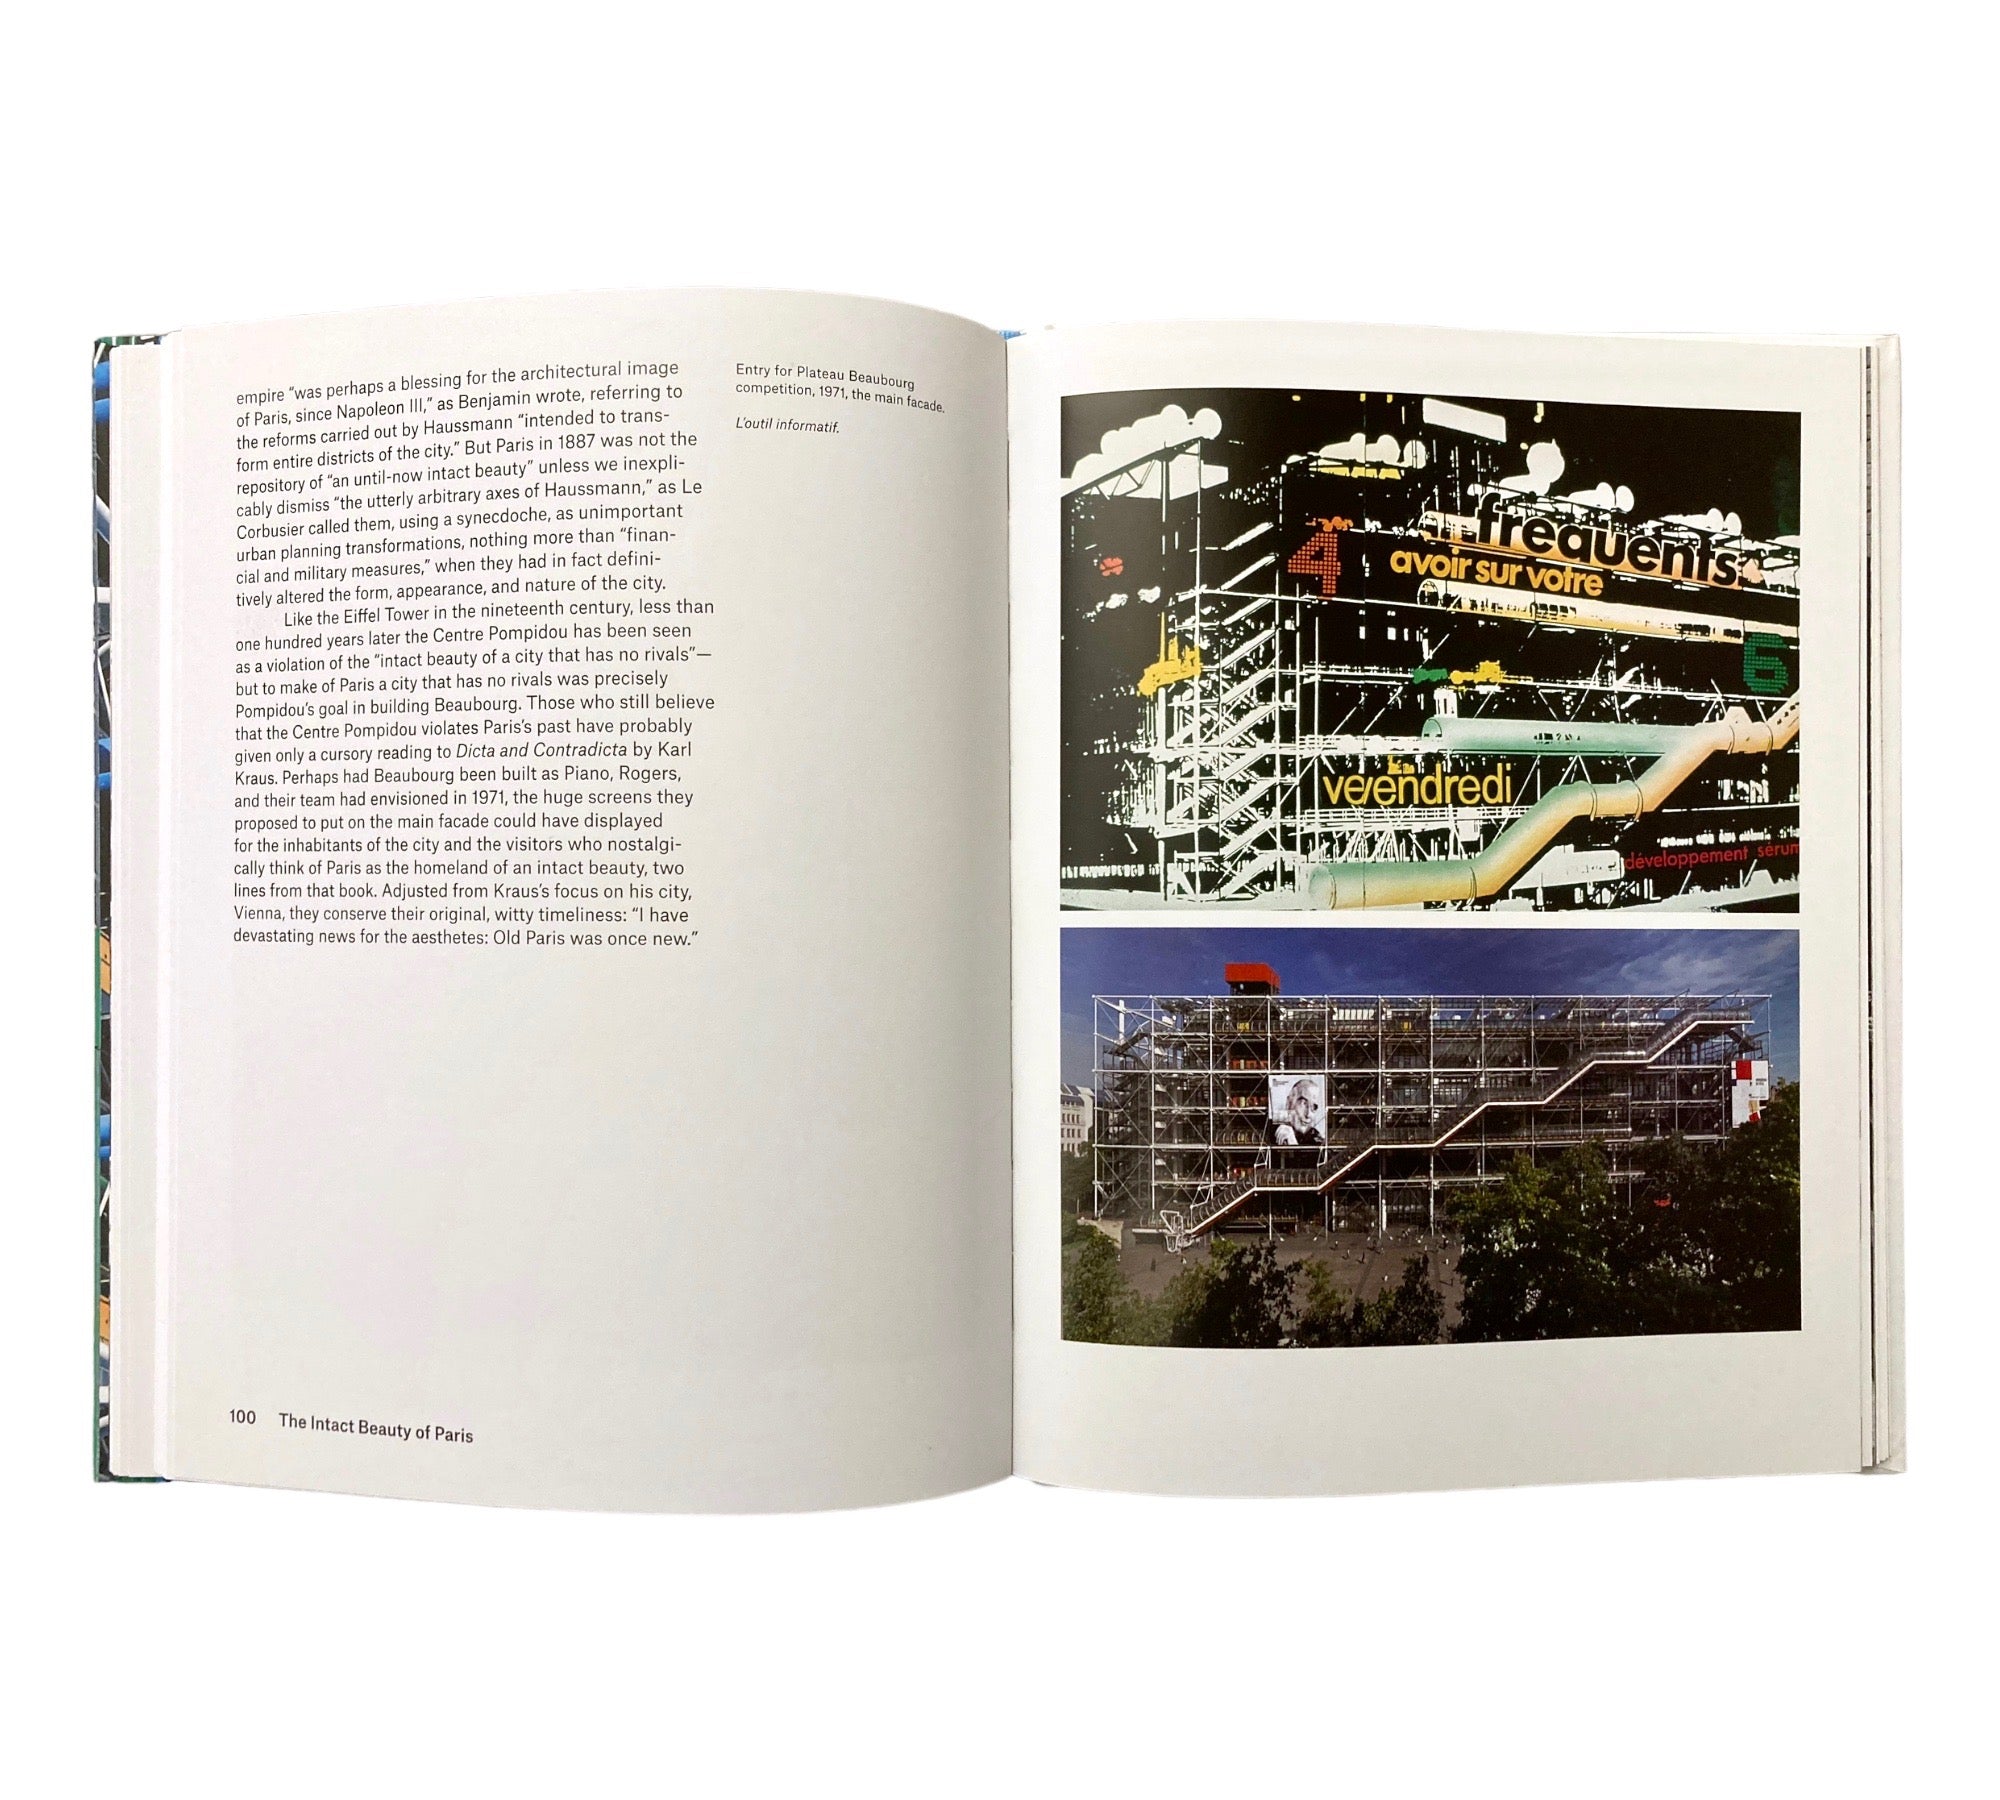 Centre Pompidou: Renzo Piano, Richard Rogers, and the Making of a Modern Monument